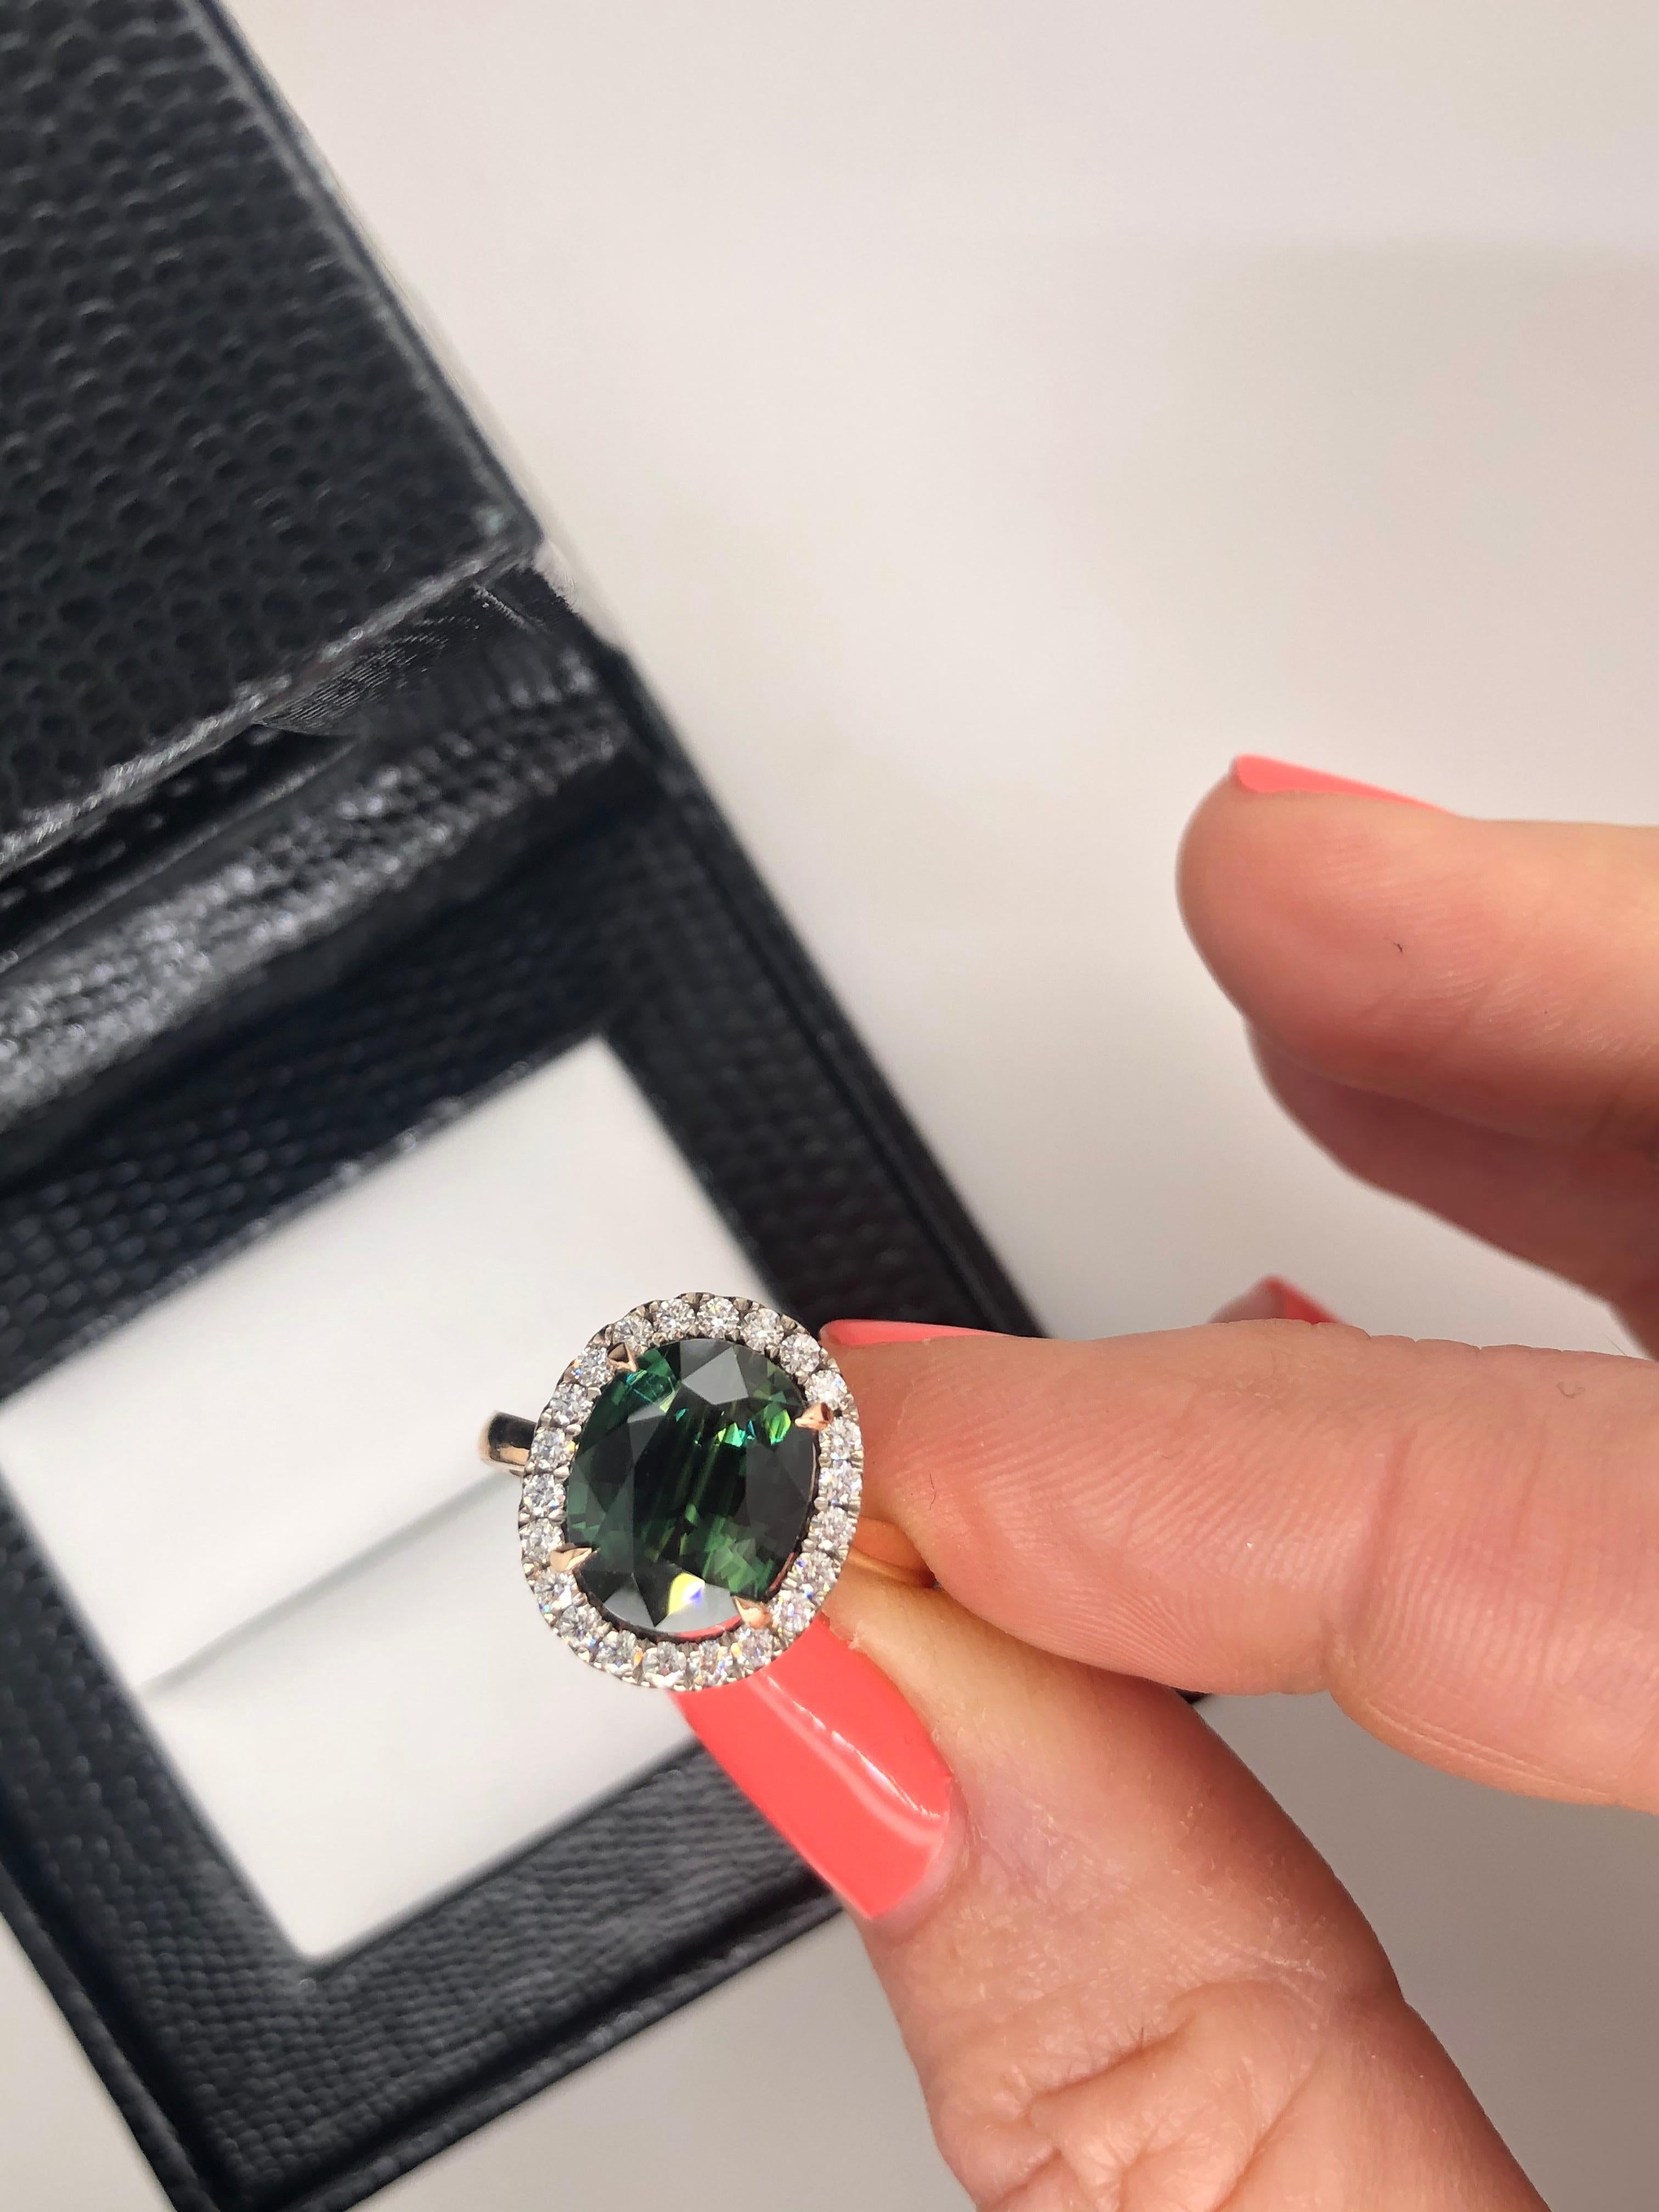 Hand Crafted, 18ct rose and white gold Natural 'Deep Green' 3.73ct Sapphire as per GSL Certificate AA62767/4, set in rose gold claws, surrounded by white gold, claw set white diamonds, weighing 22 = 0.30ct F in colour, VS in clarity. Suspended on a